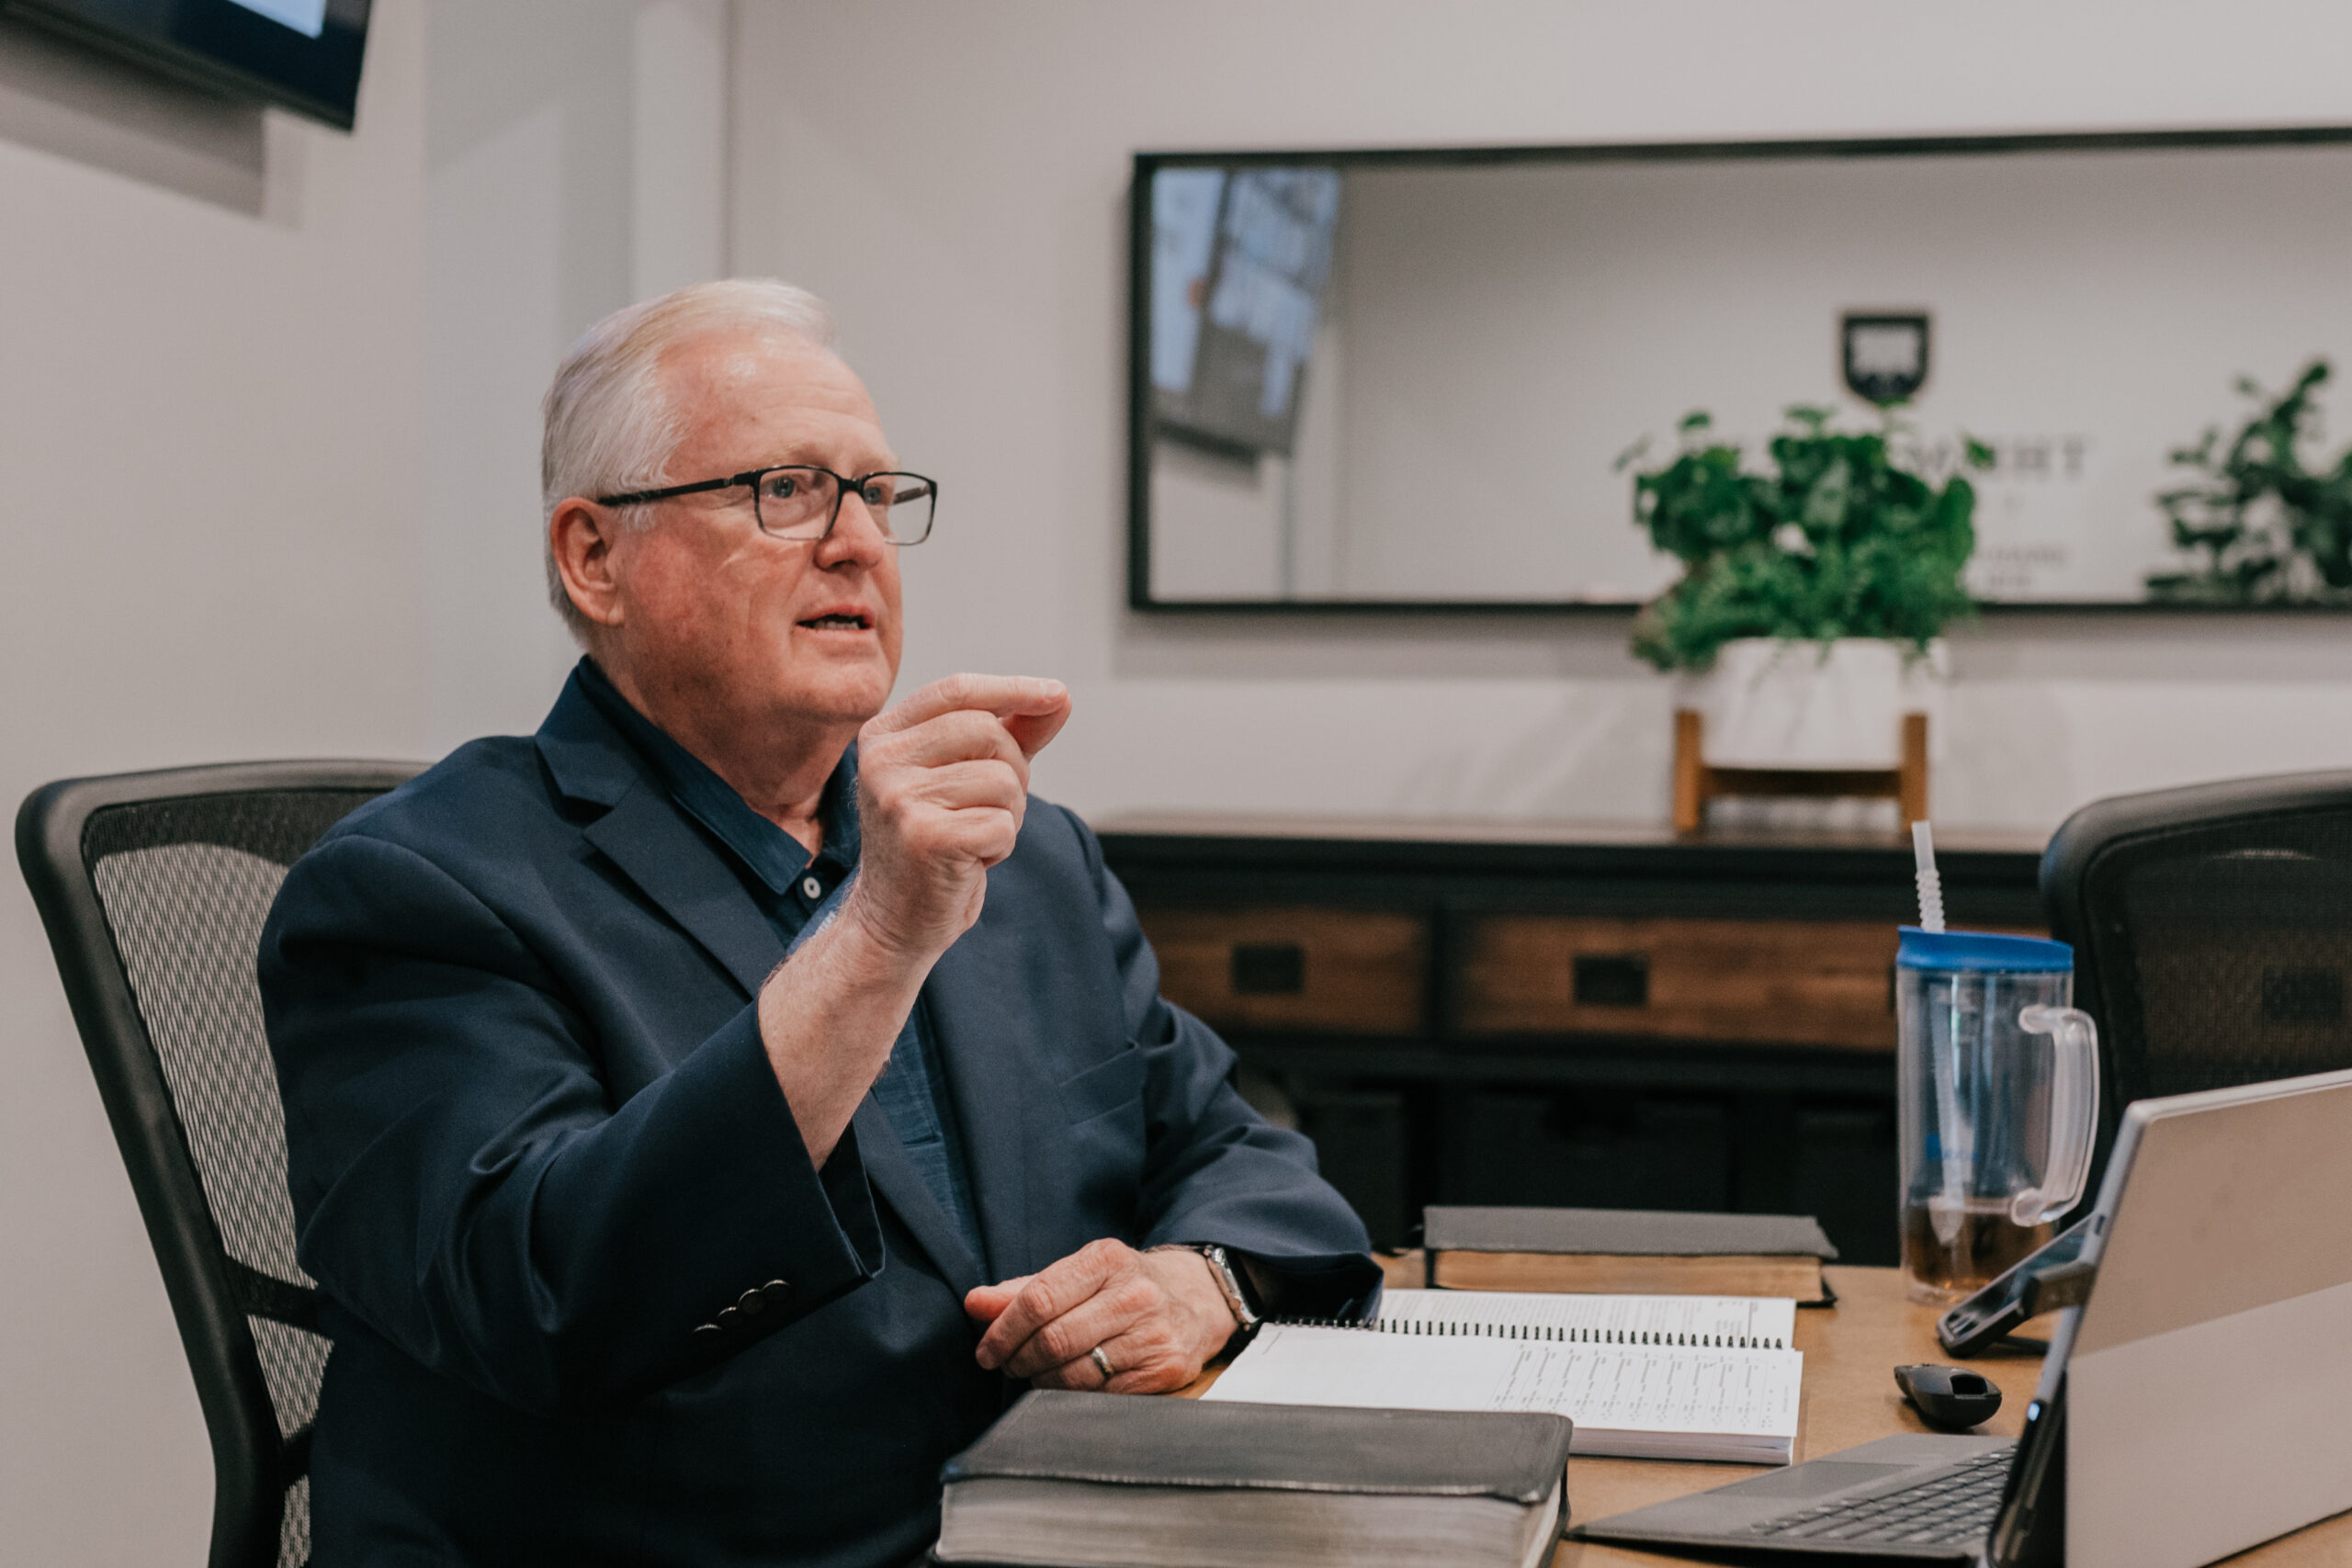 TMU Planning To Launch Doctor of Ministry In Biblical Counseling Featured Image